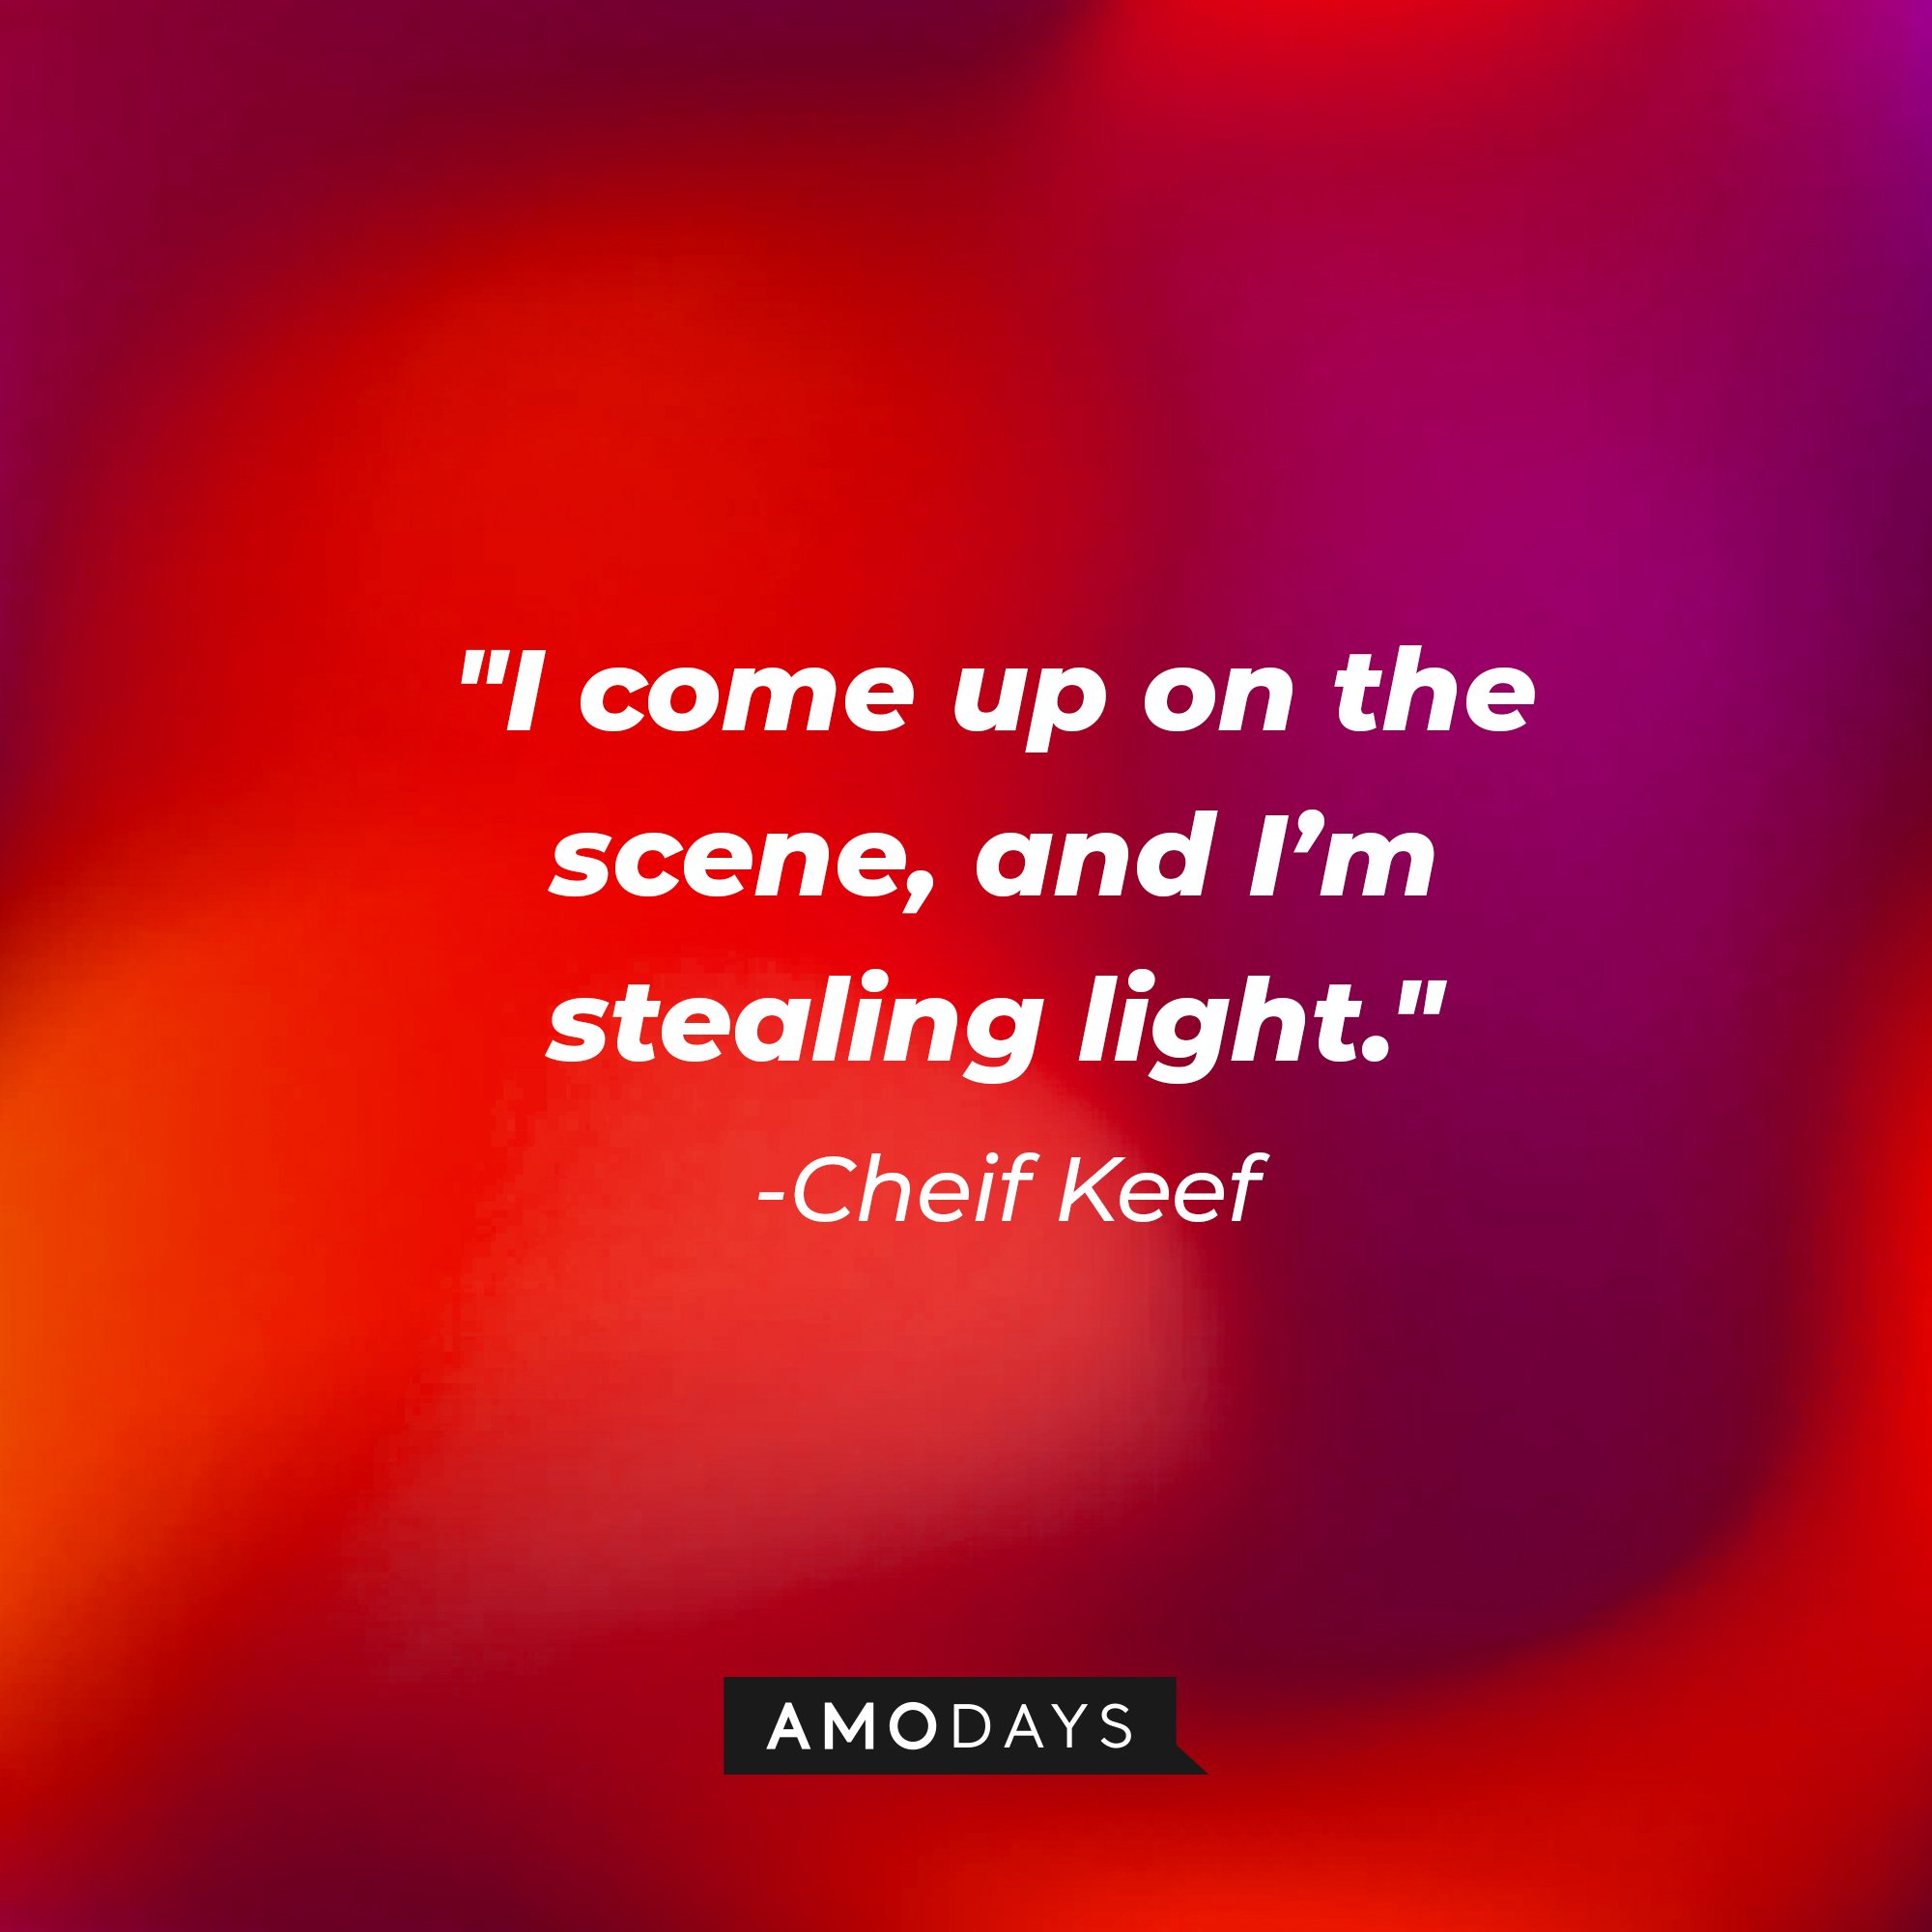 Chief Keef’s quote: "I come up on the scene, and I'm stealing light." | Image: AmoDays 